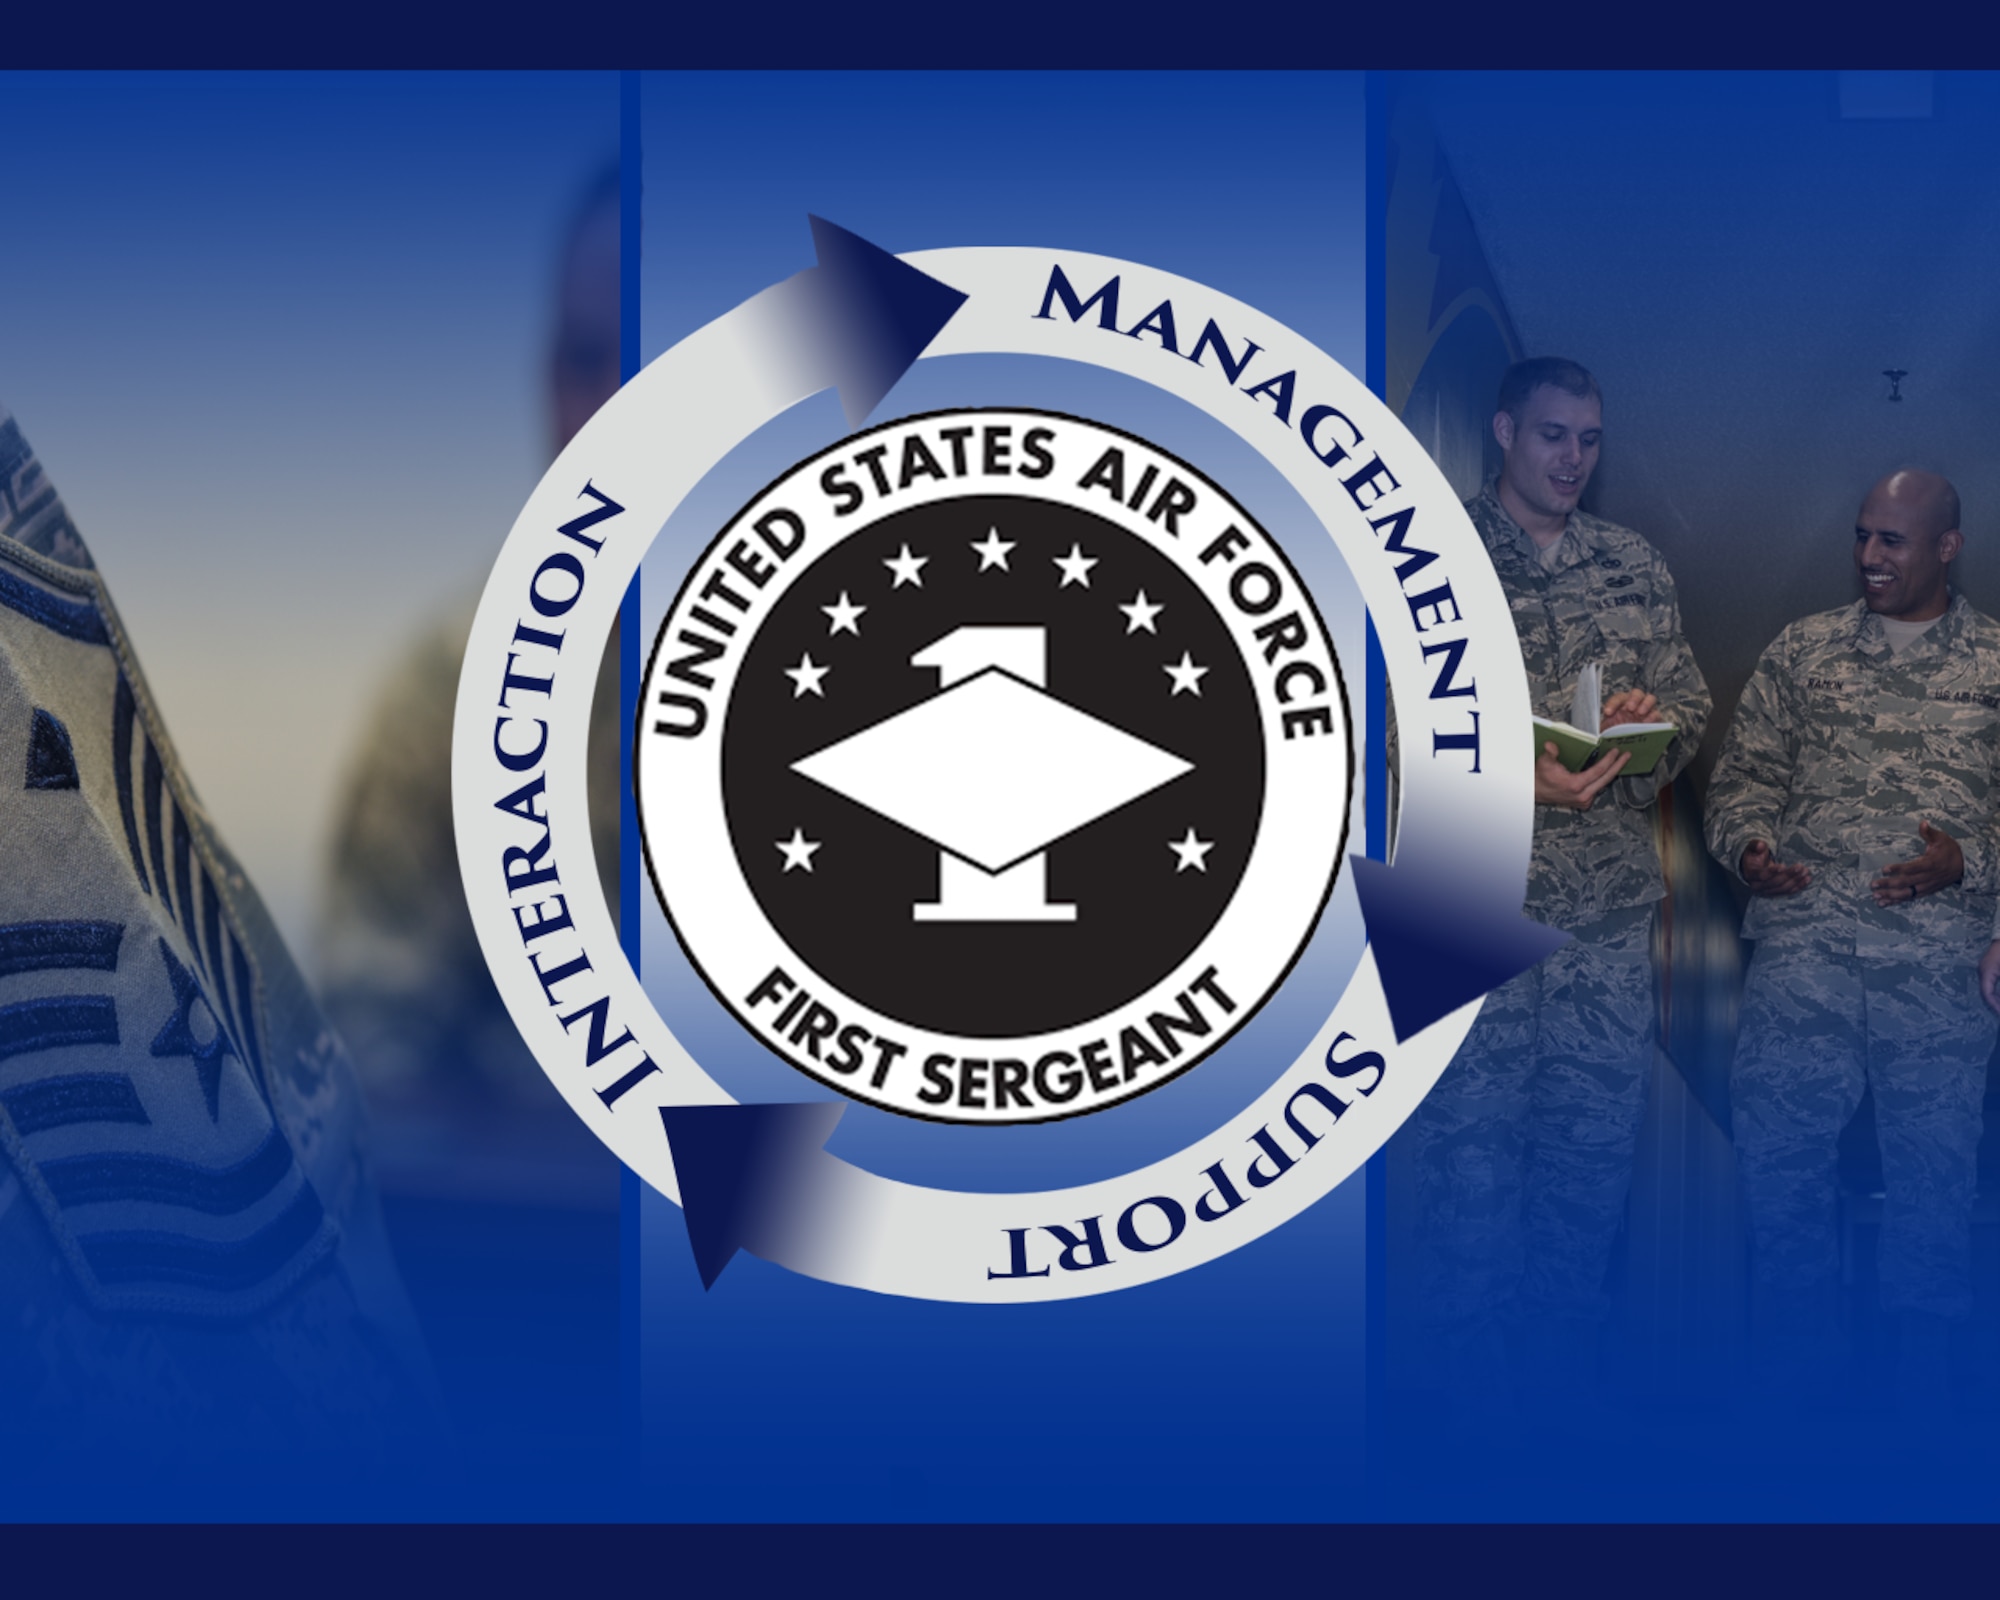 According to Air Force Instruction 36-2113, The First Sergeant, first sergeants primarily support the mission through interaction, support and management of Airmen and families. They are responsible for answering the needs of the unit 24 hours a day, seven days a week and may be required to work long irregular hours. (U.S. Air Force graphic by Airman 1st Class Sadie Colbert)